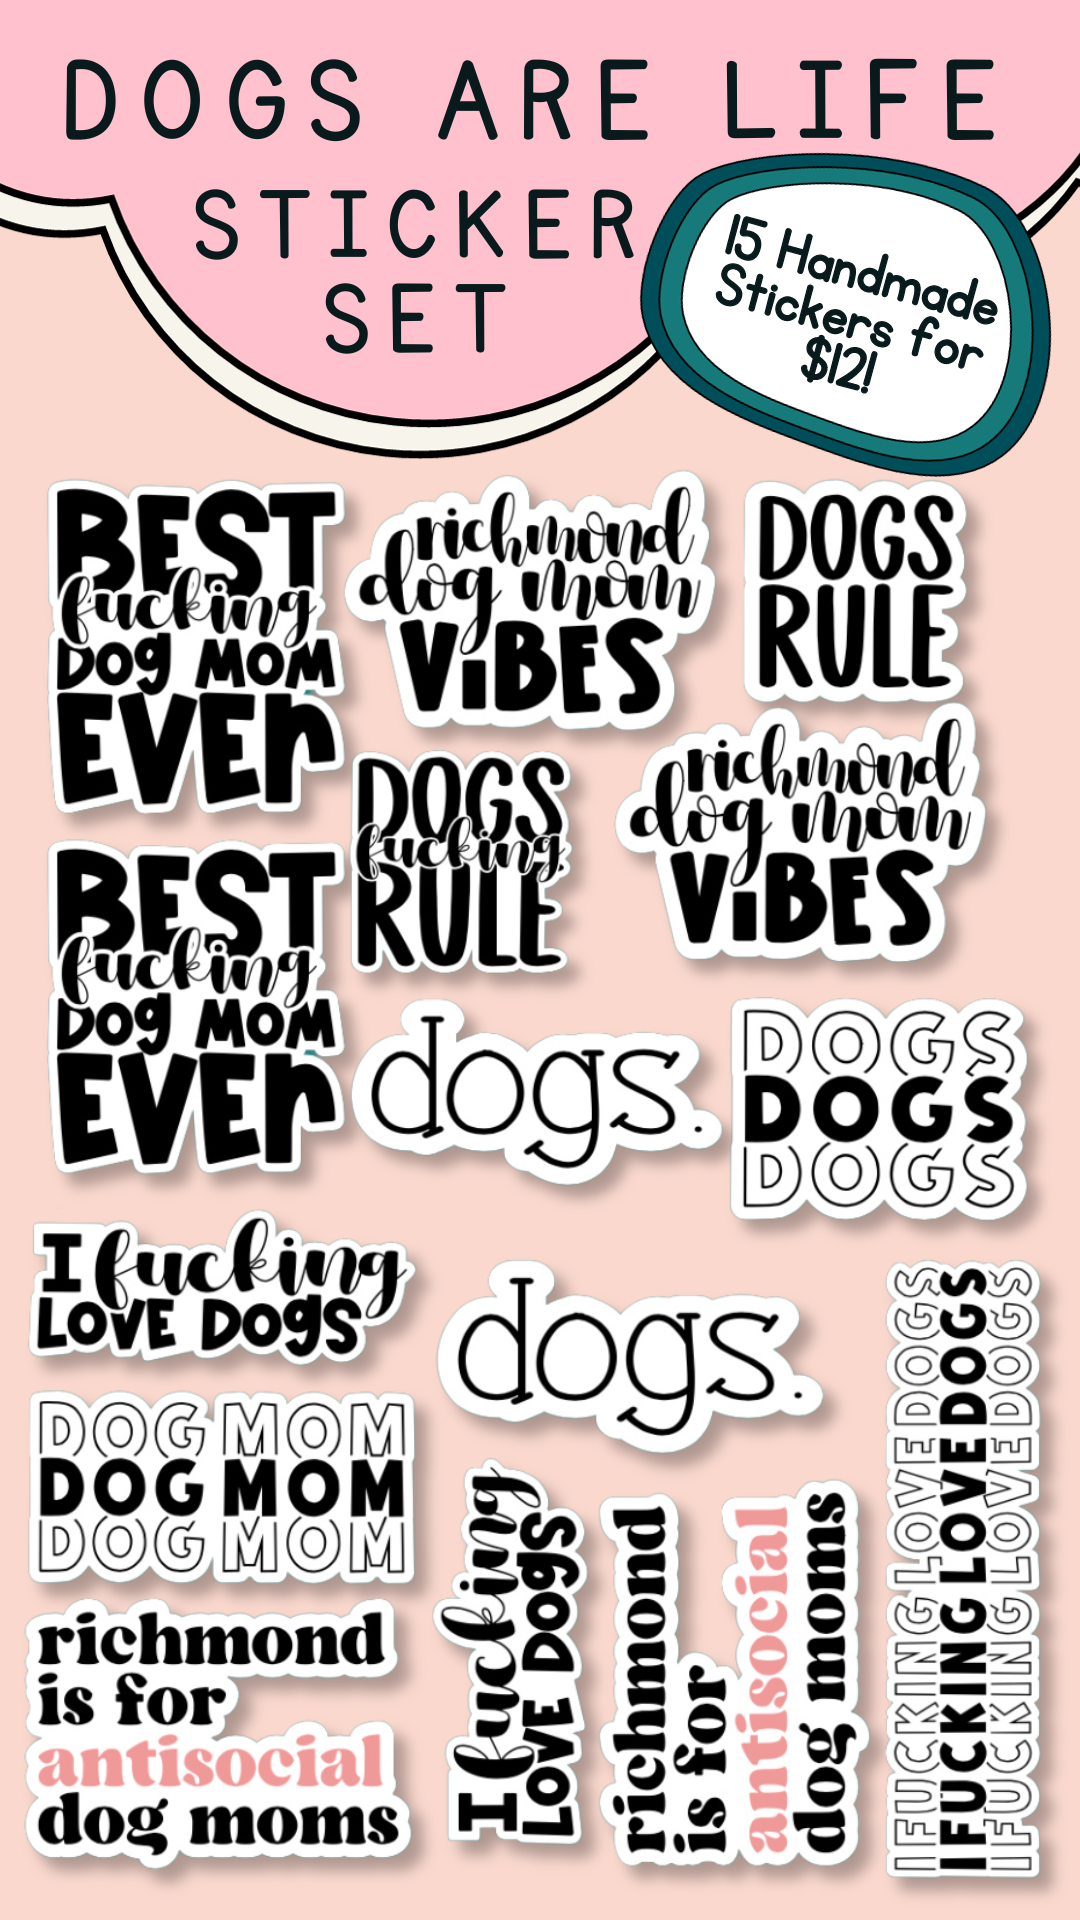 DOGS ARE LIFE Sticker Set